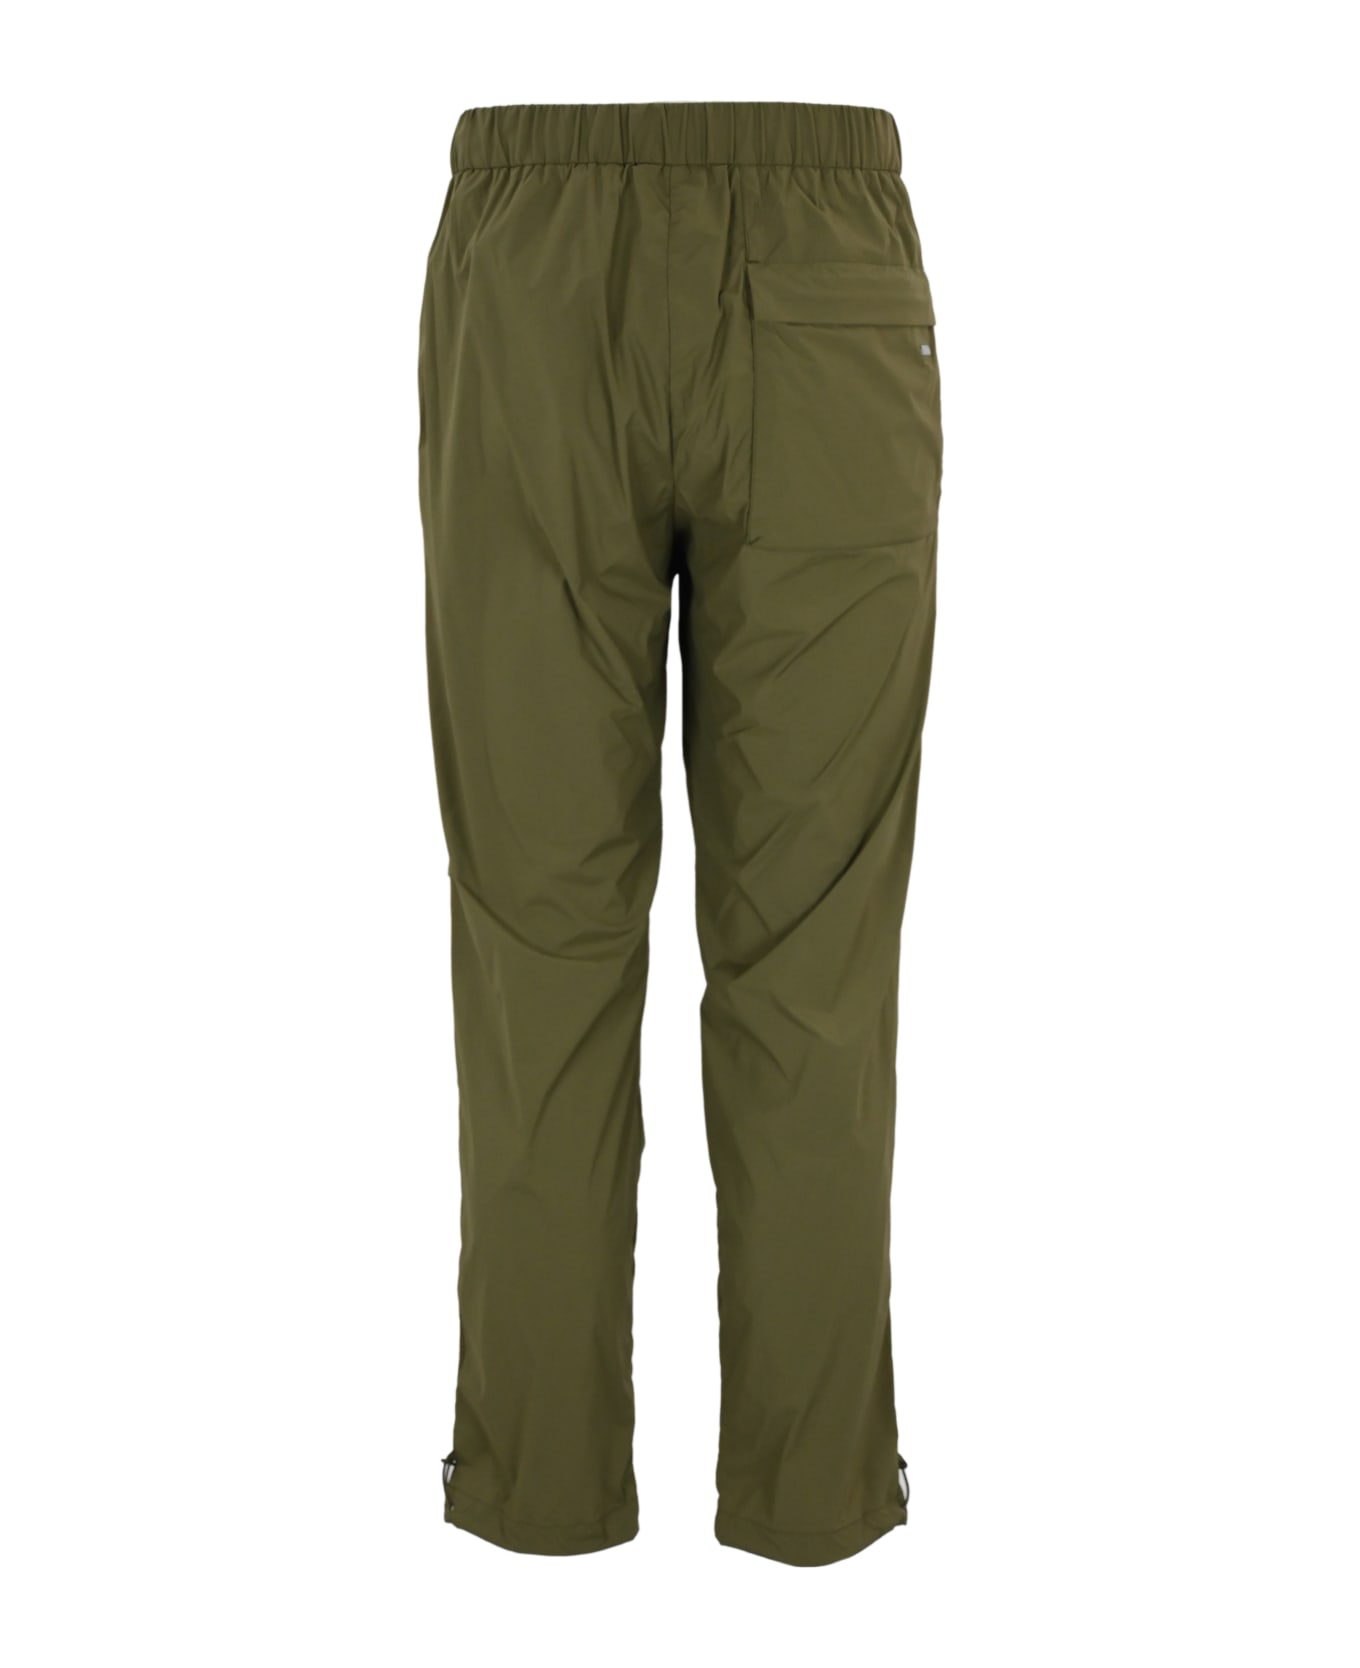 Herno Stretch Nylon Trousers - Light military